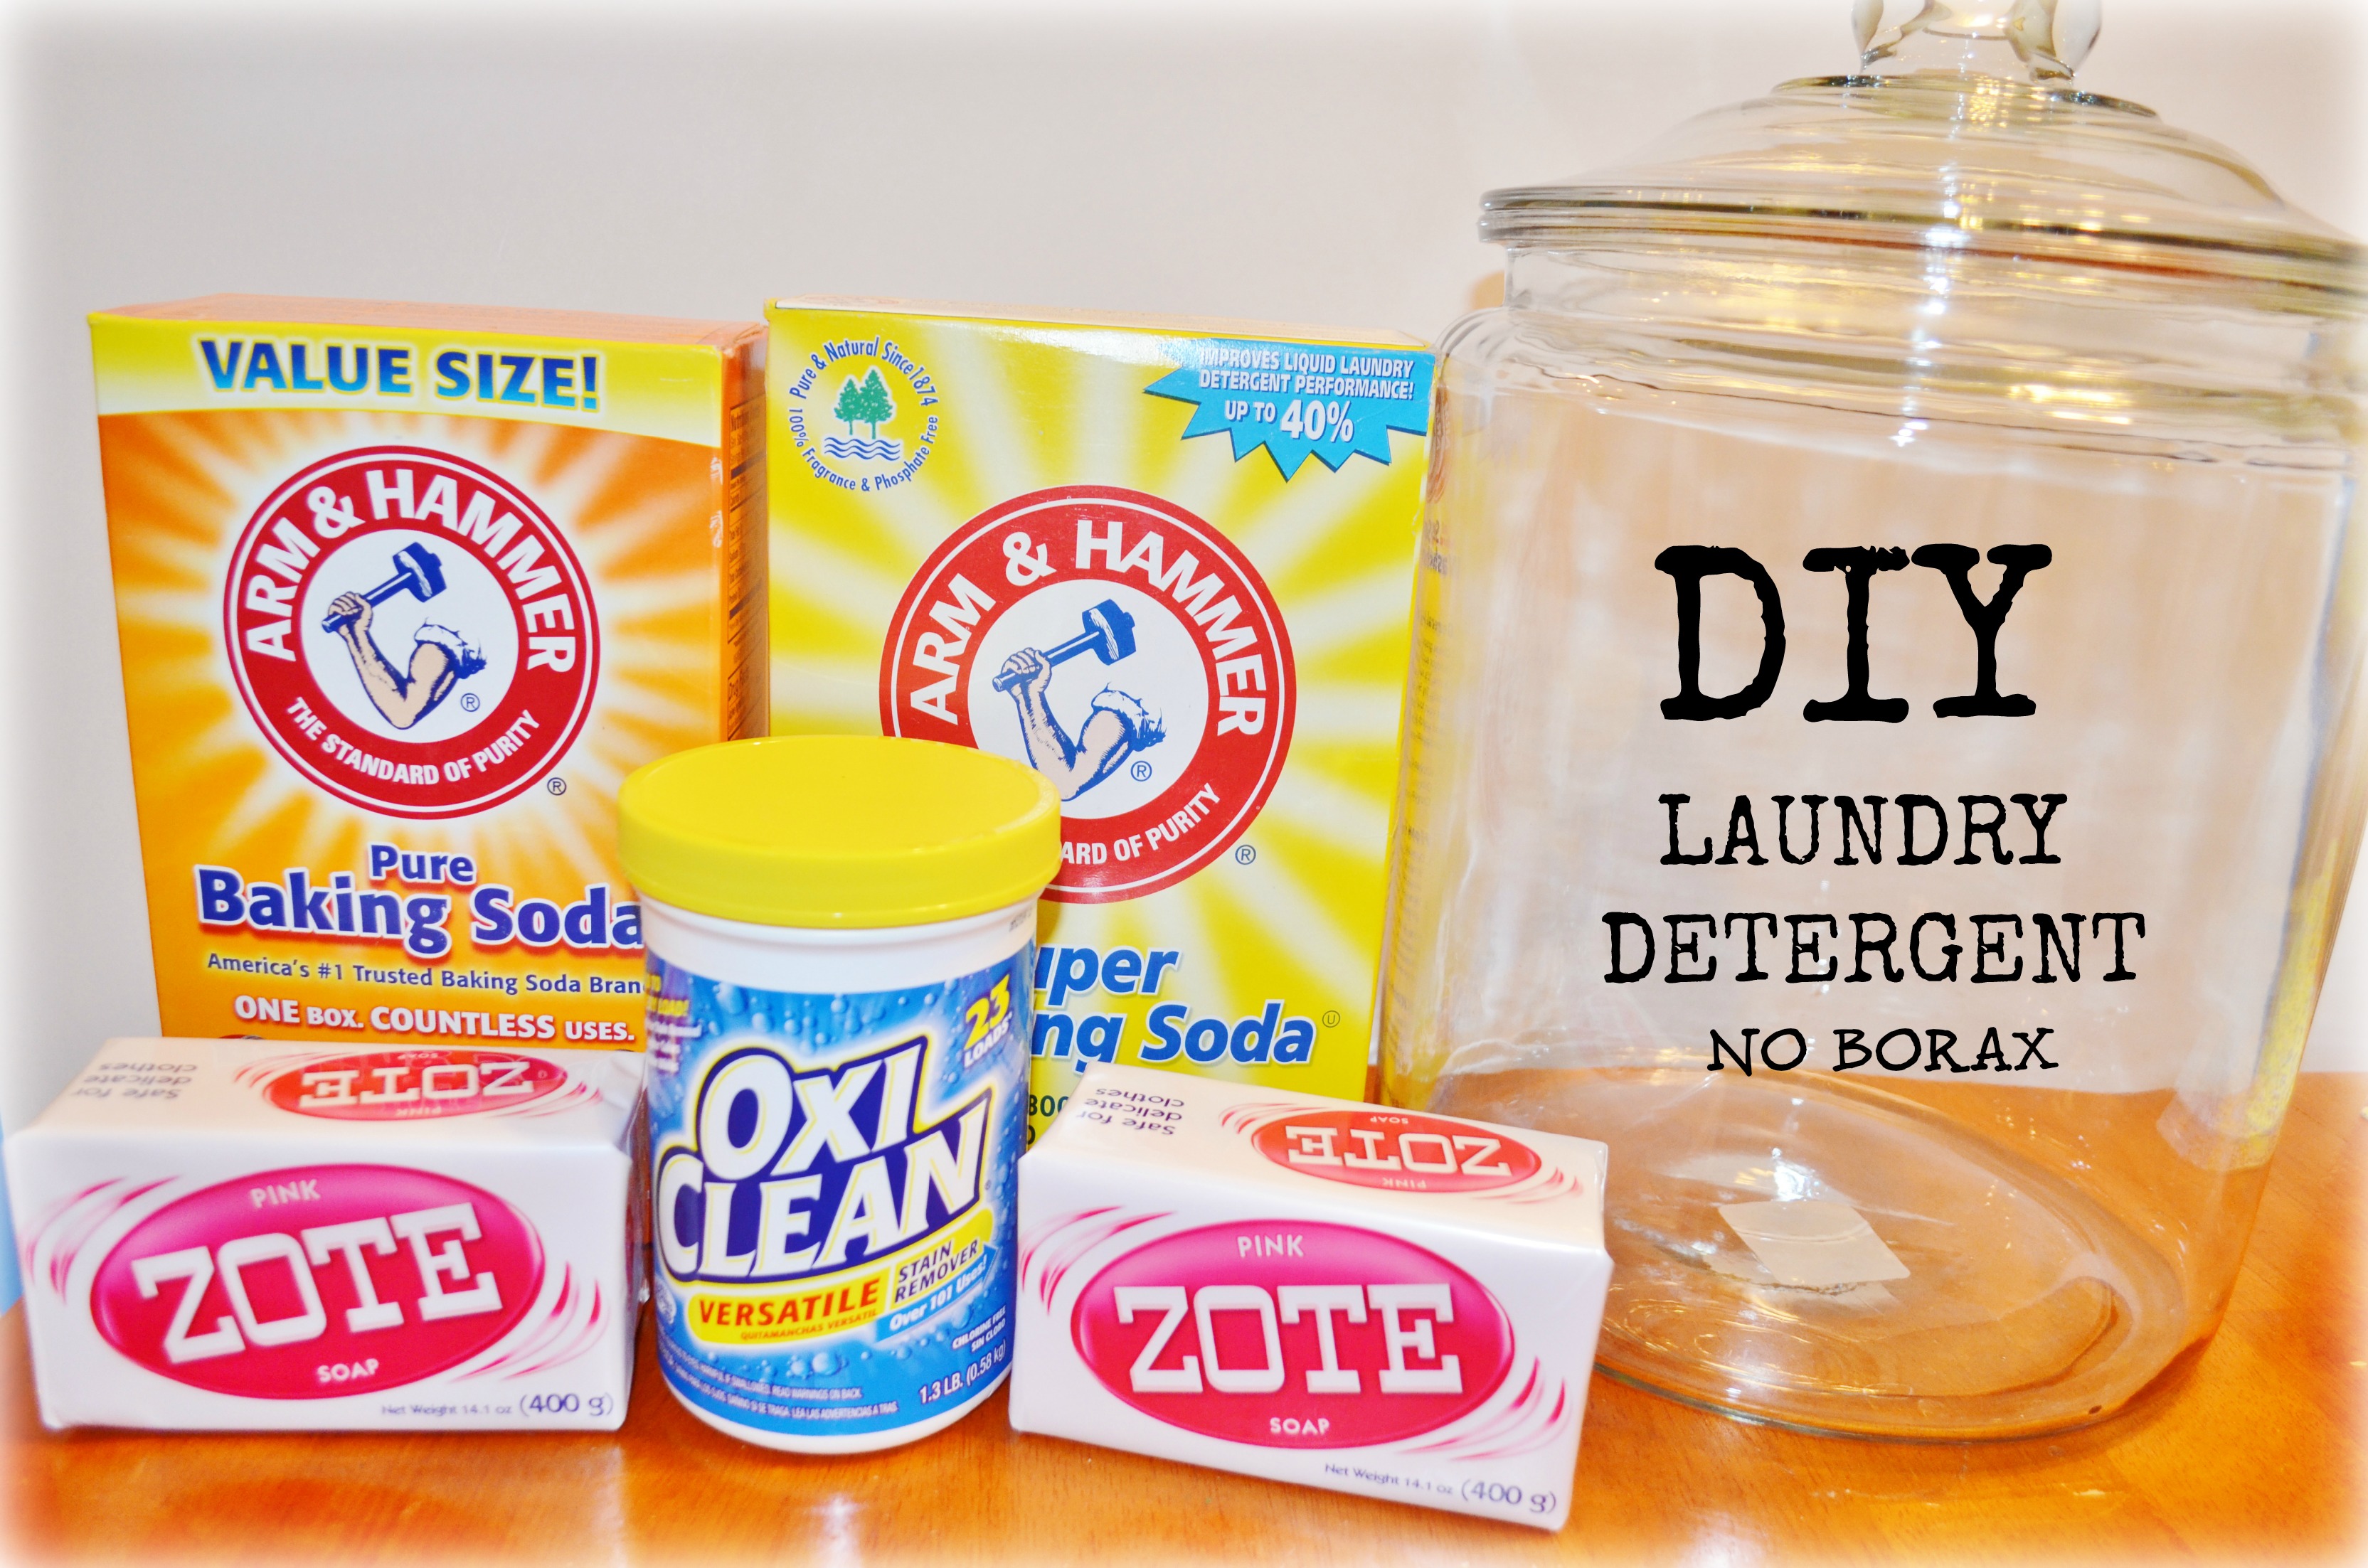 How to Make Homemade Laundry Detergent Without Borax